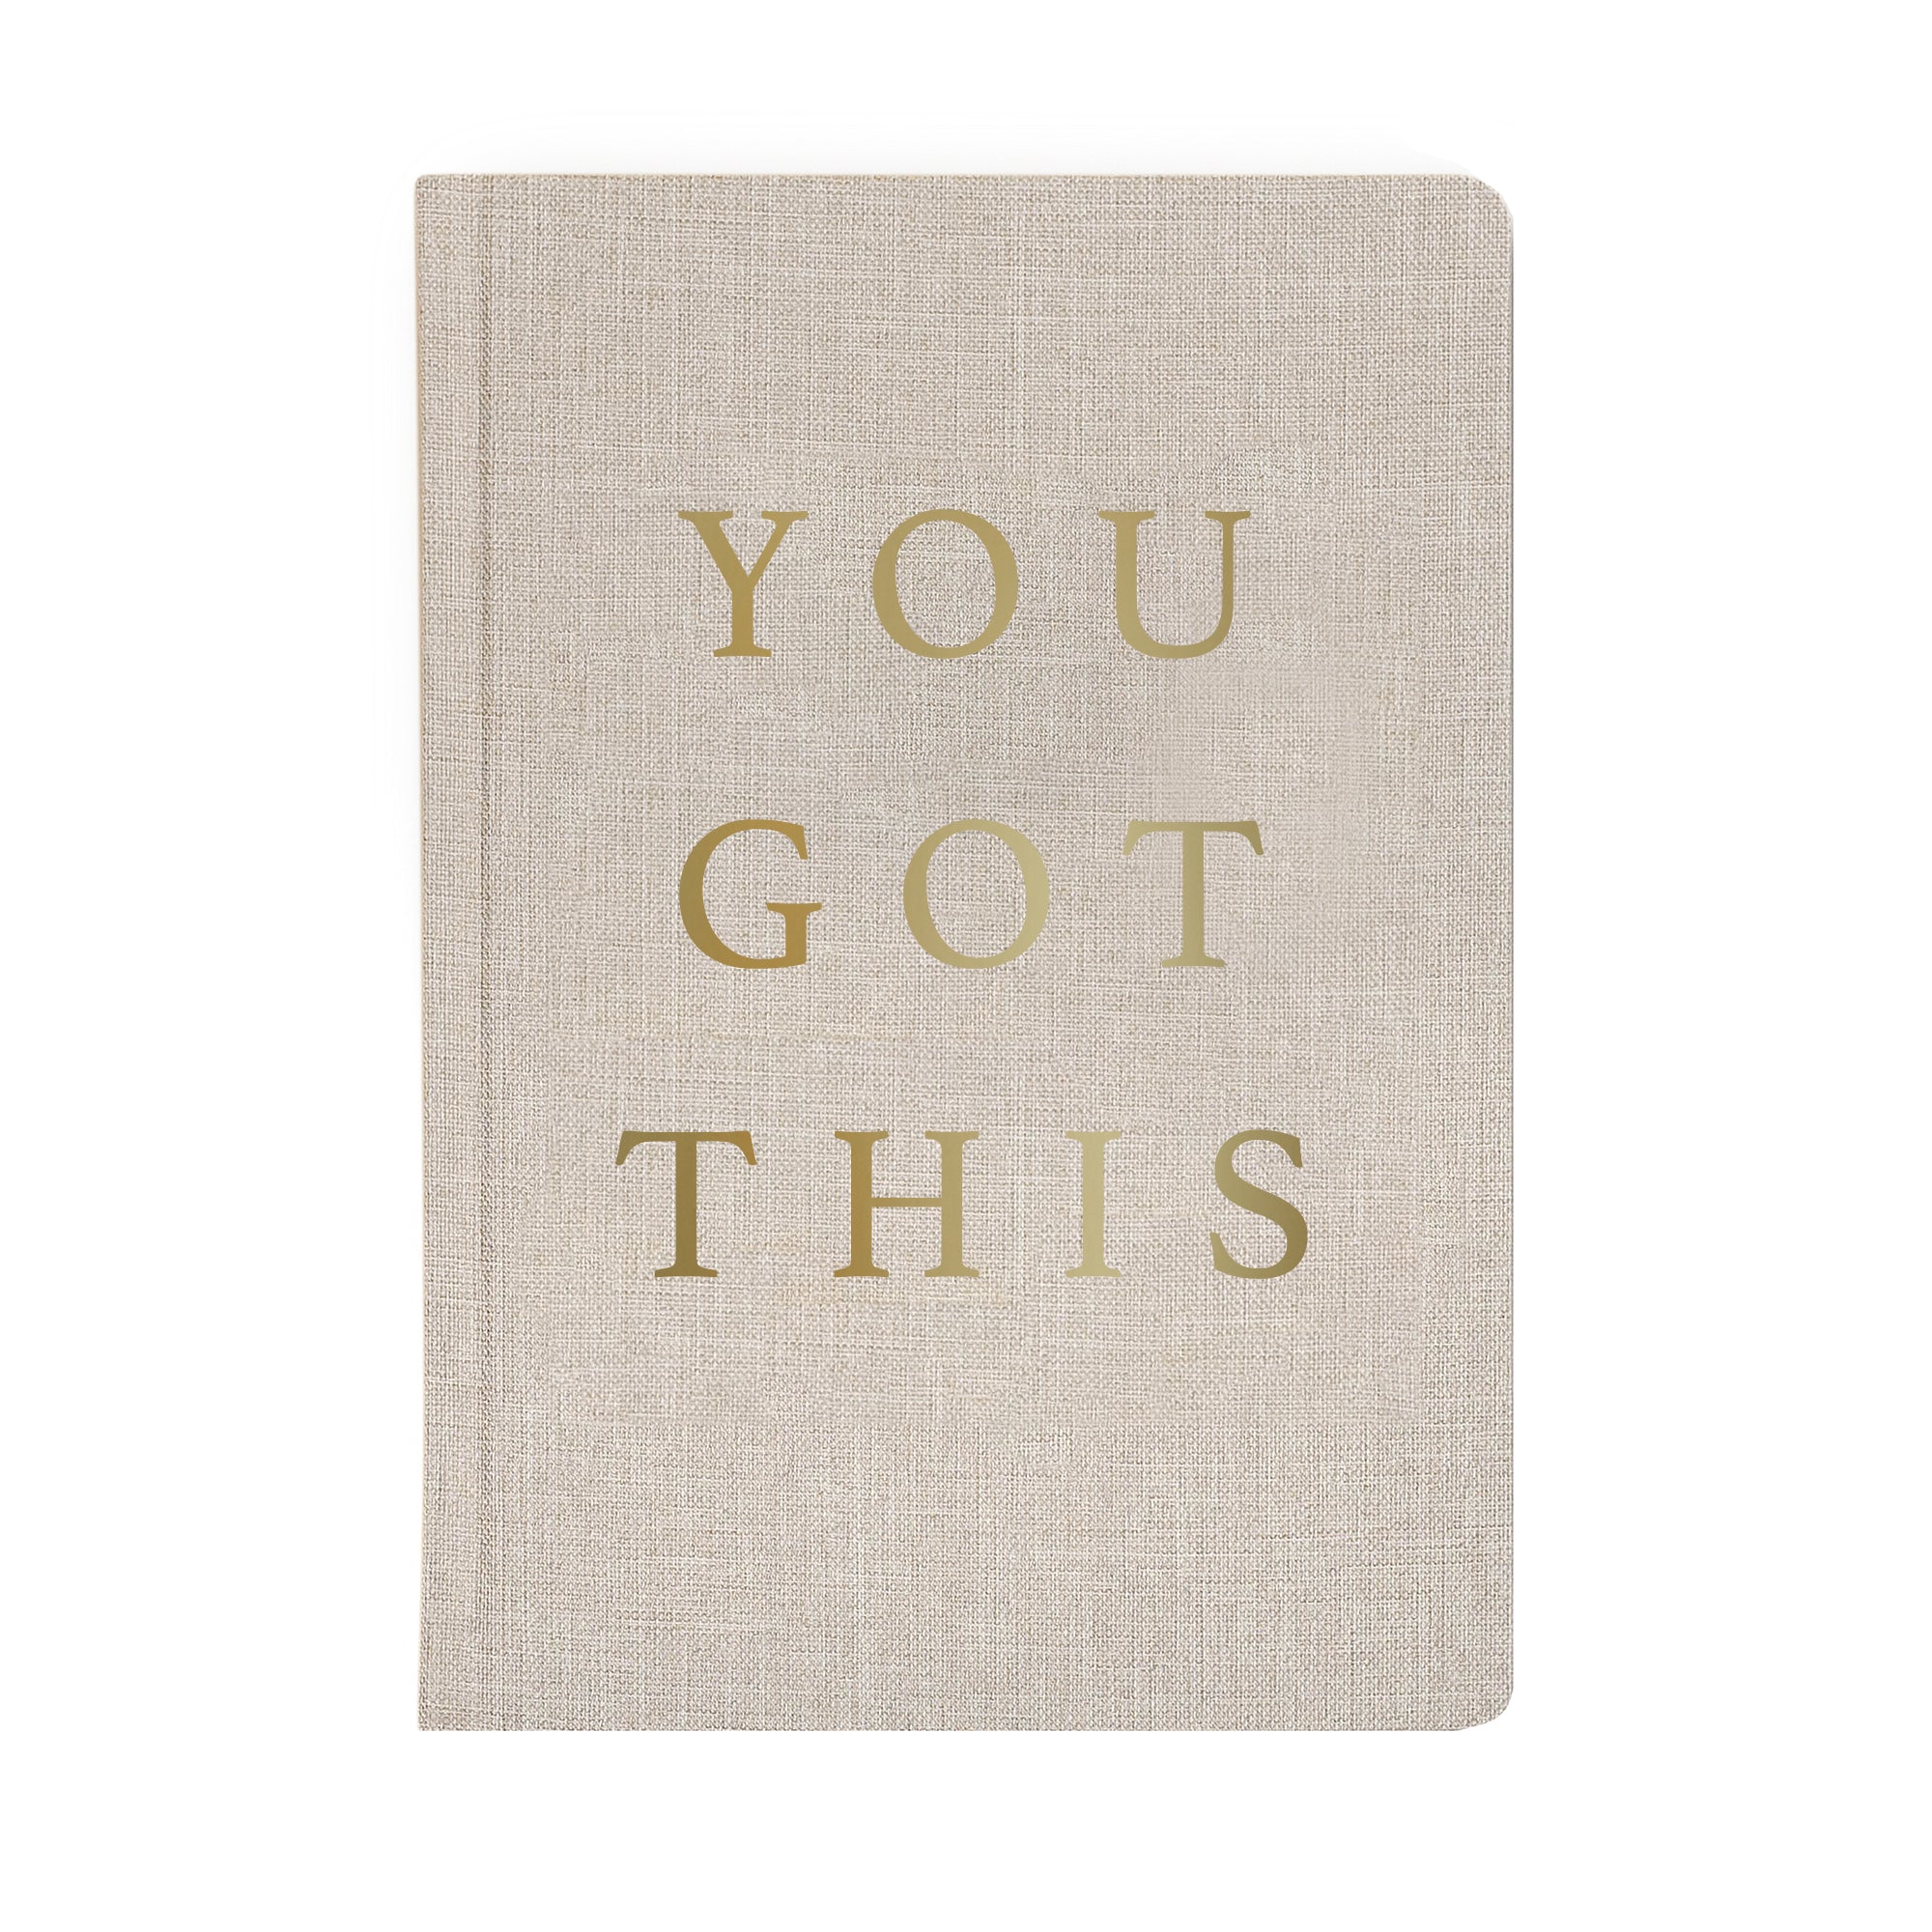 You Got This Fabric Notebook